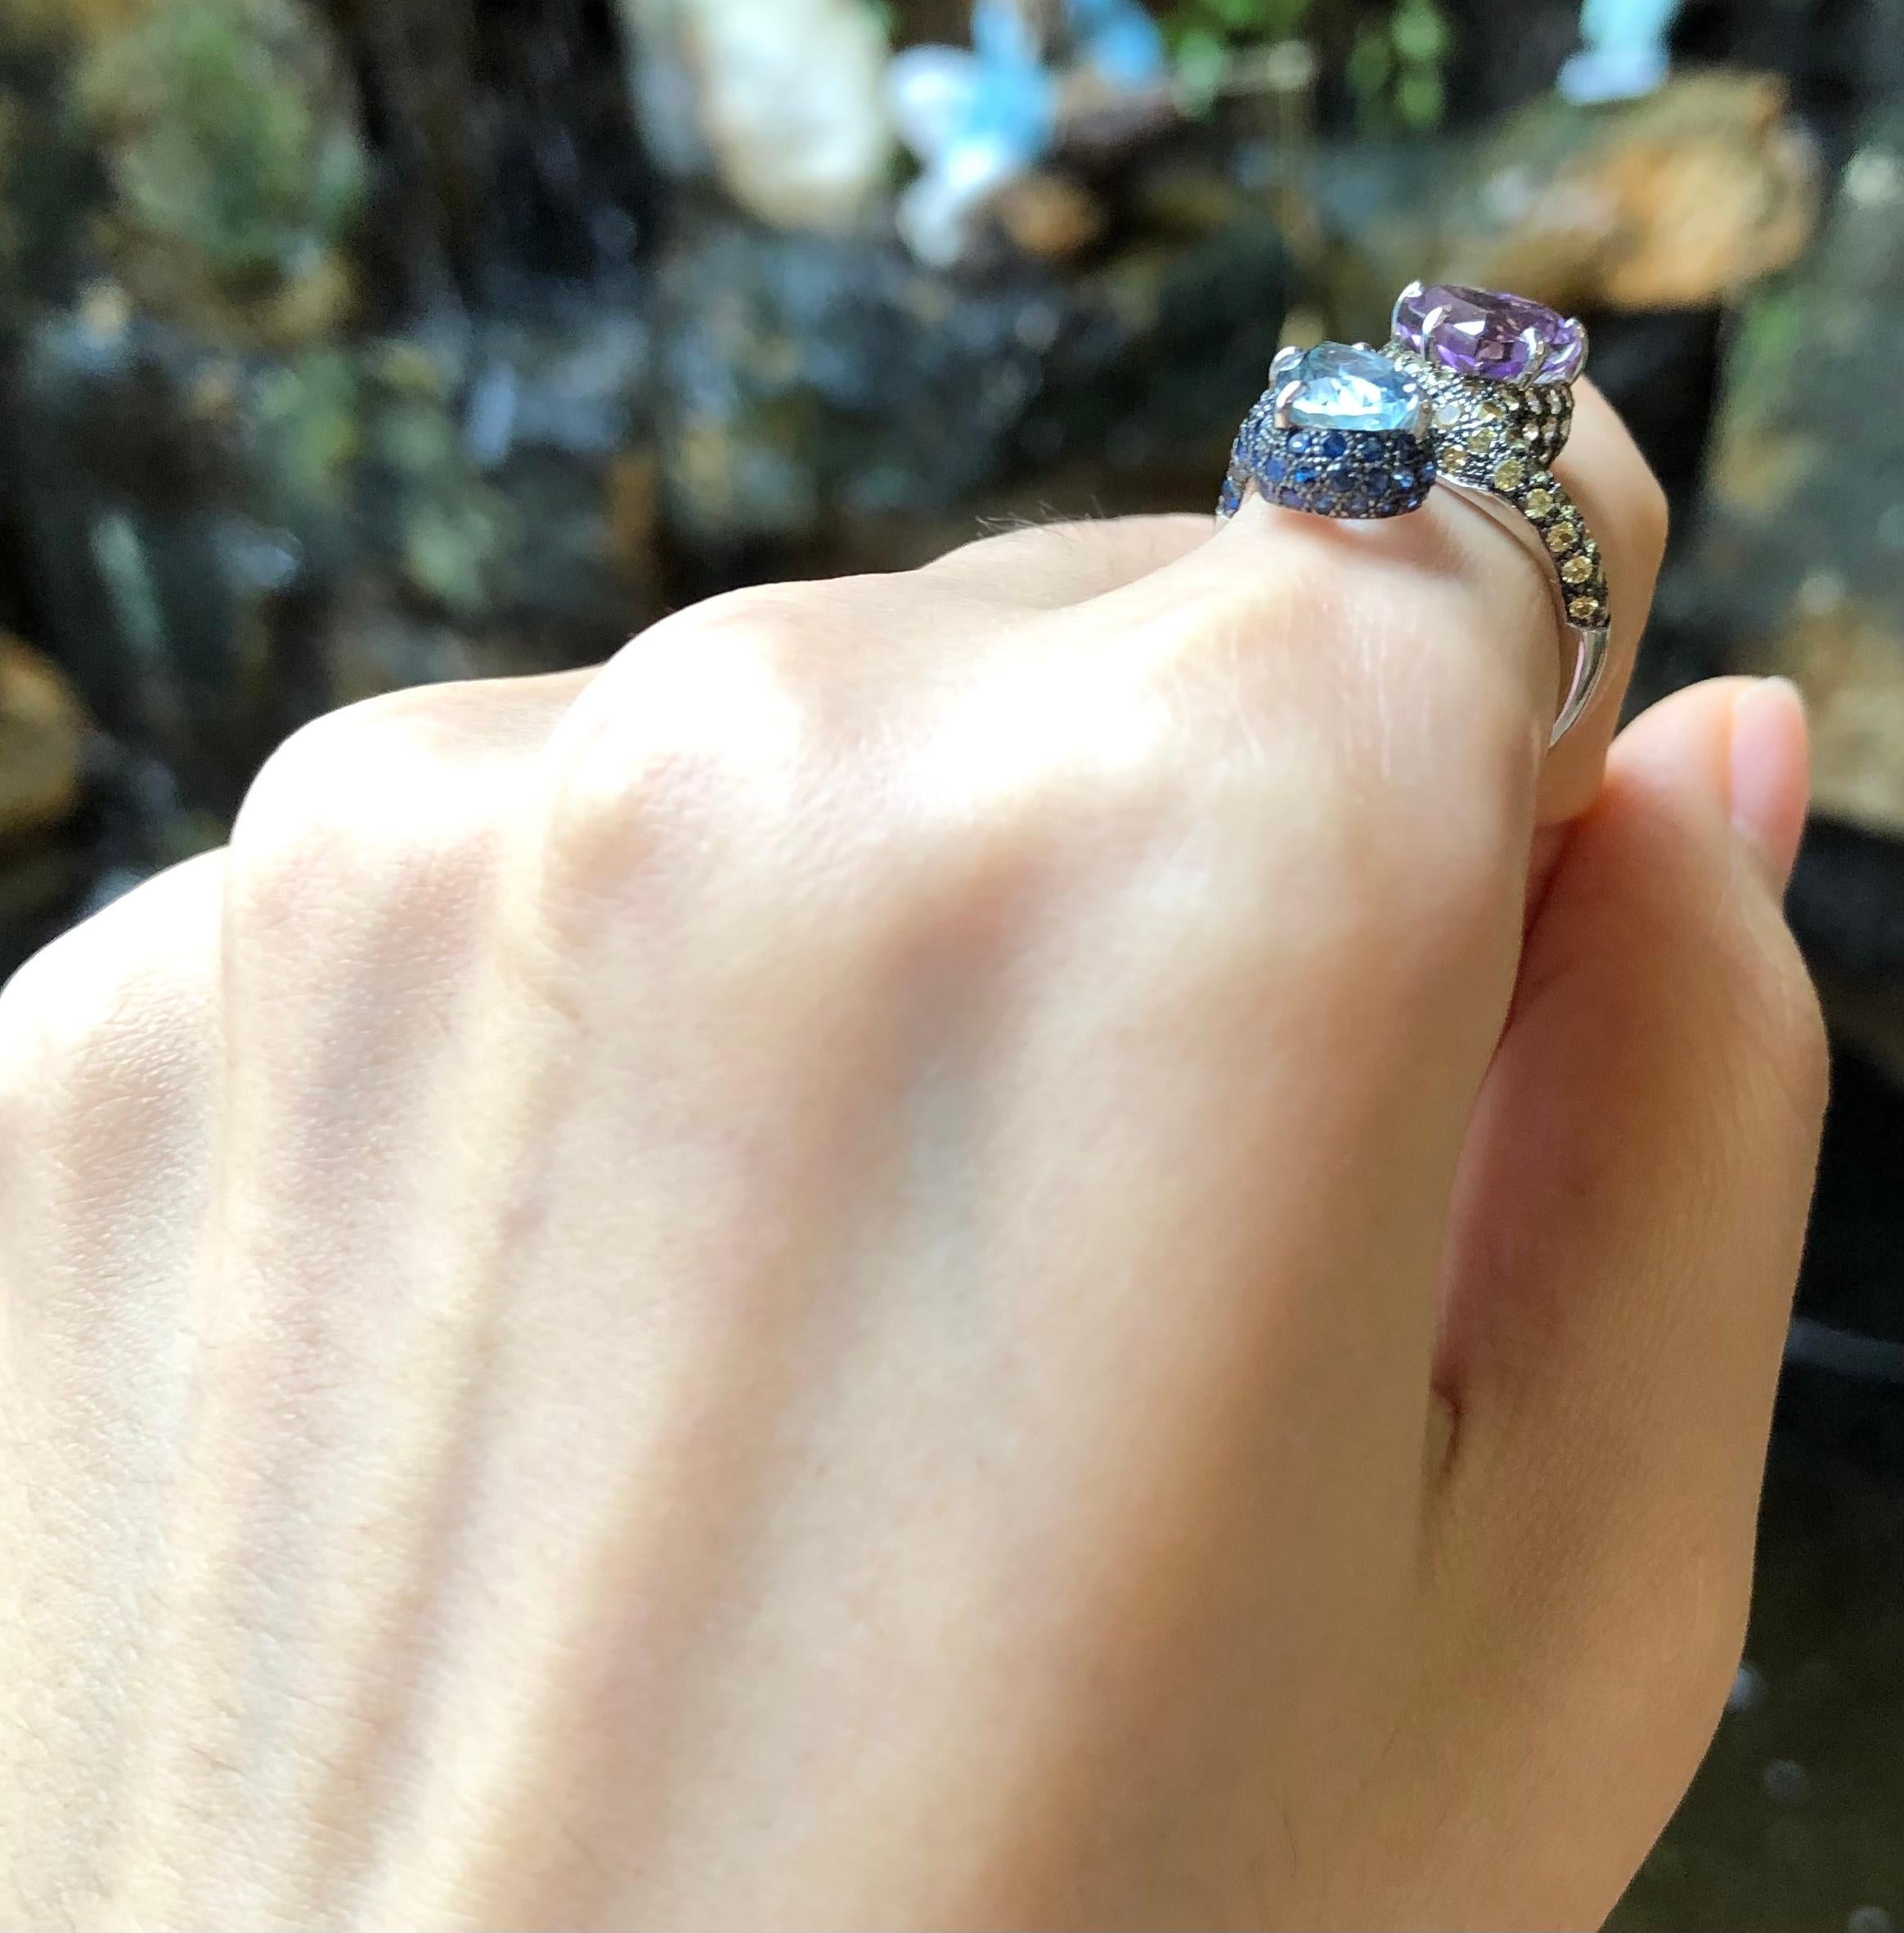 amethyst and yellow topaz ring